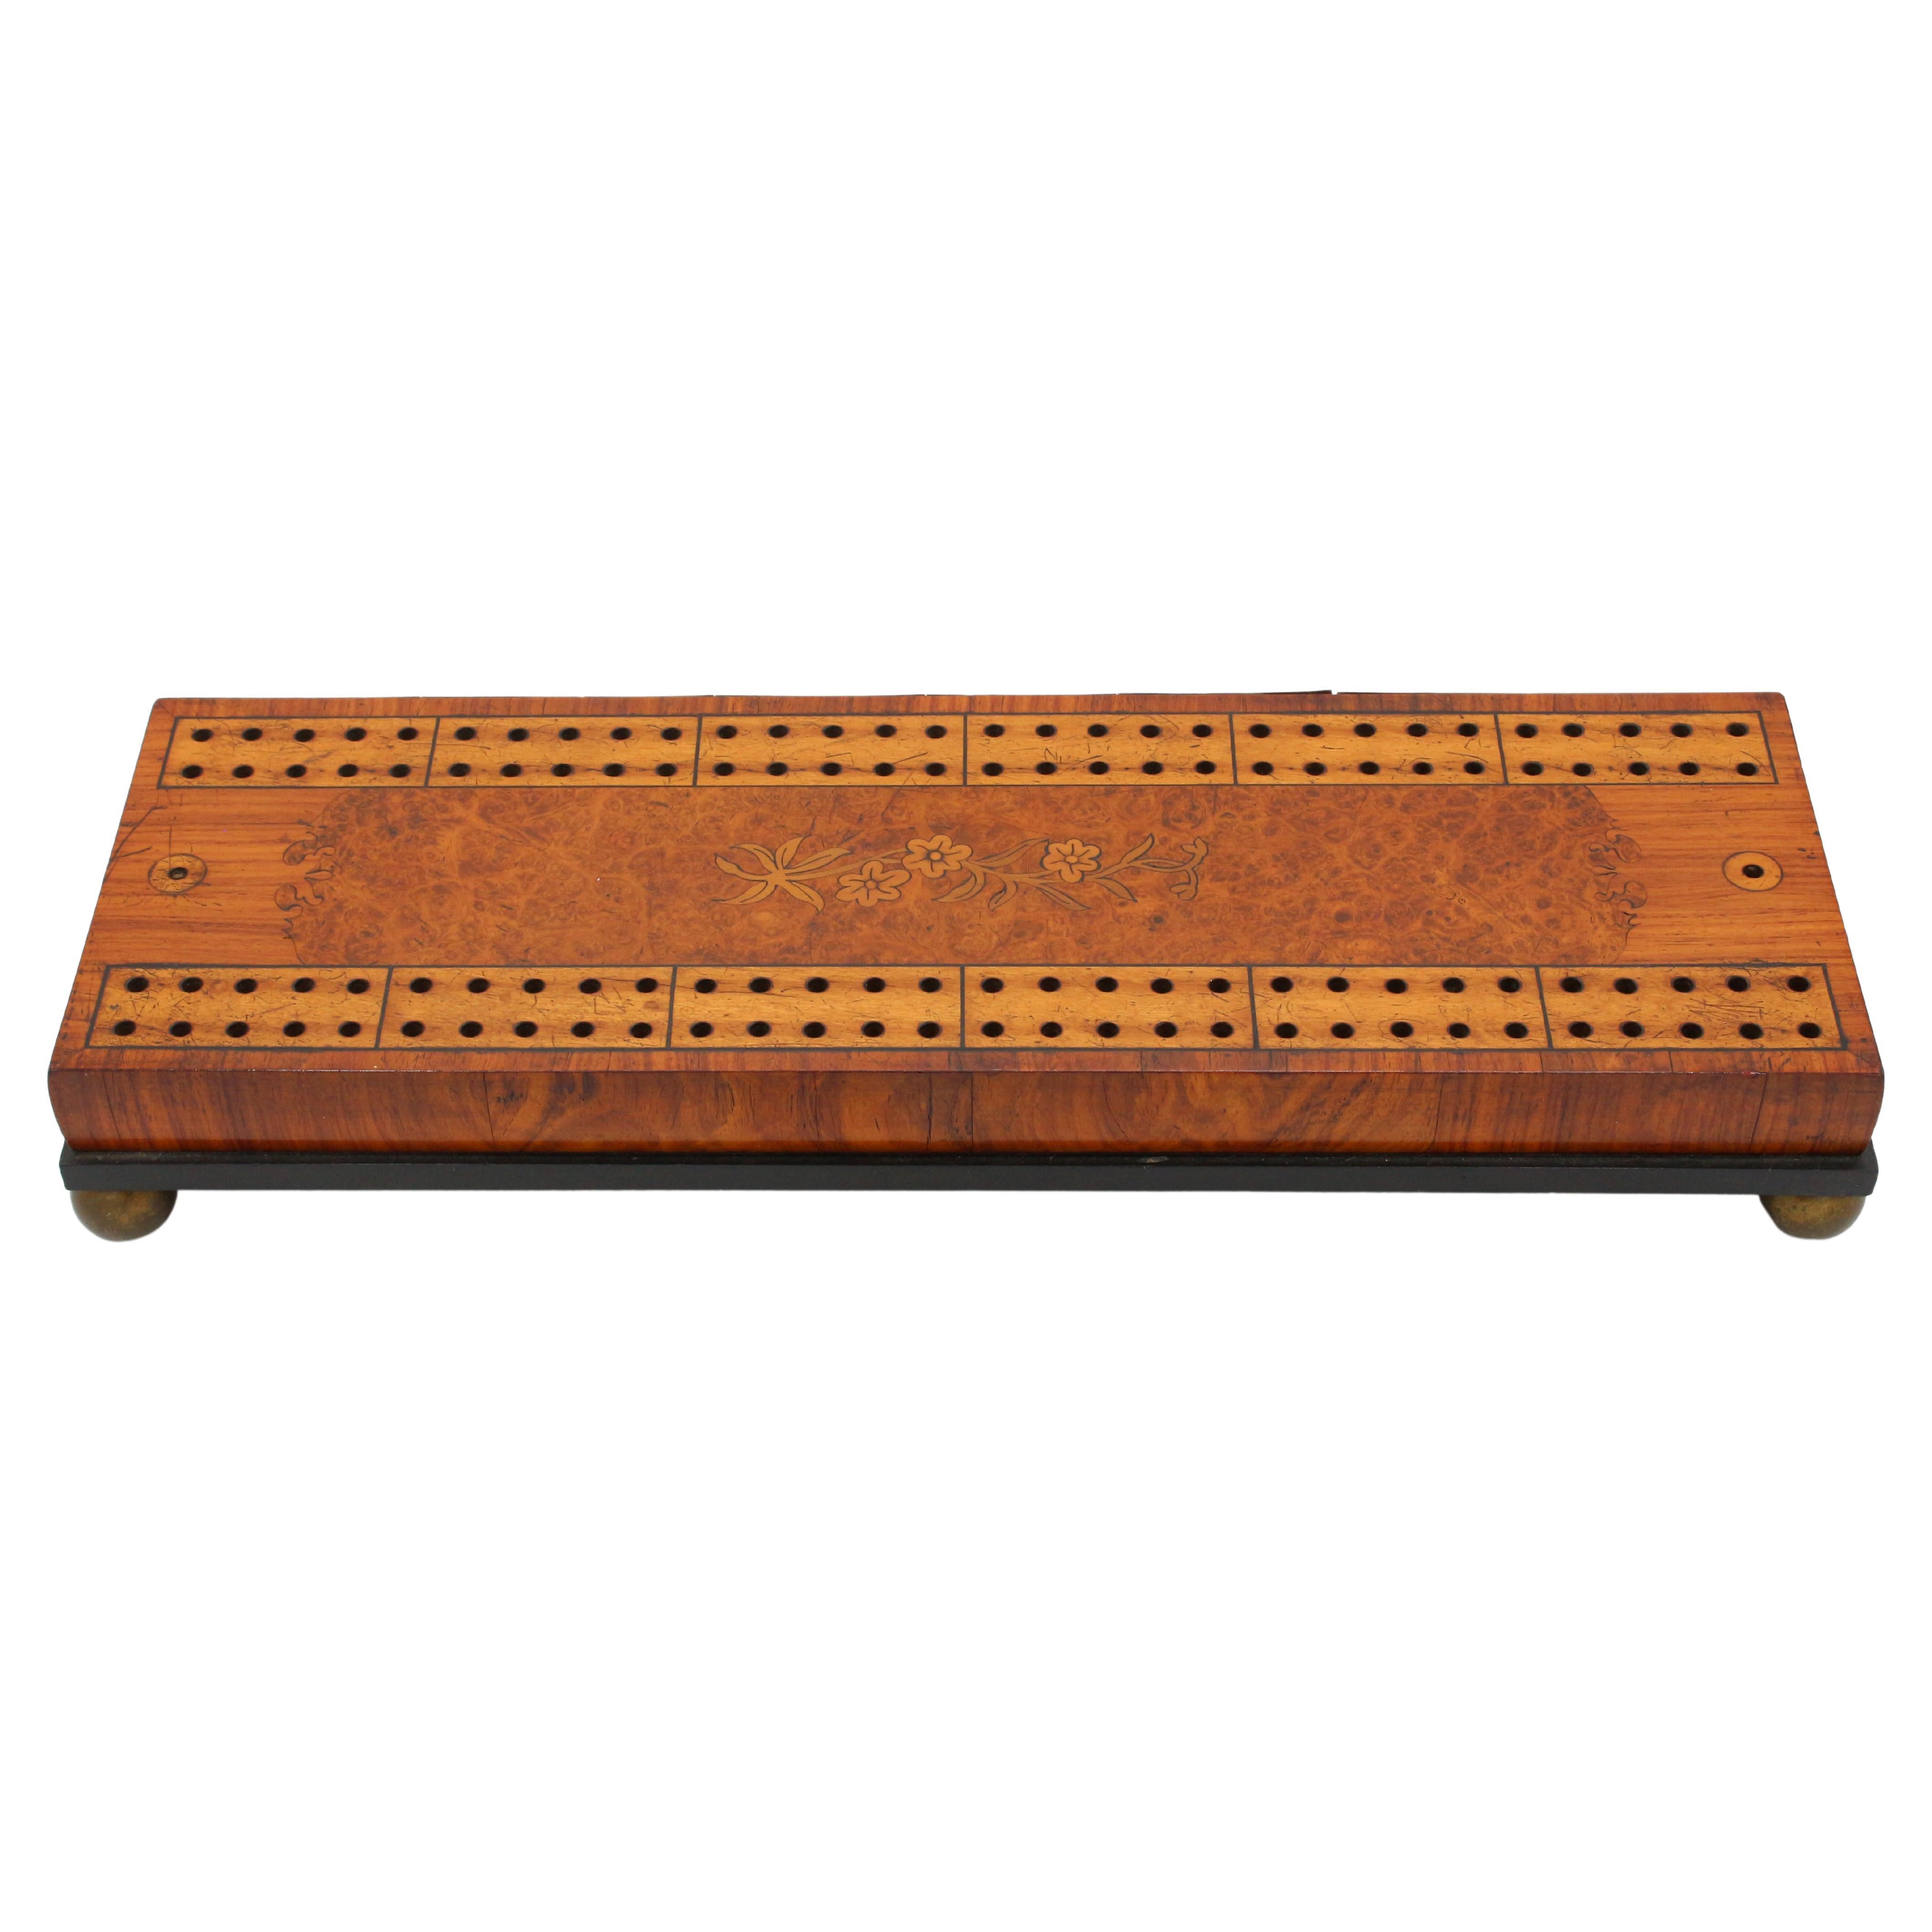 Circa 1860-80 English Marquetry Inlaid Cribbage Board For Sale